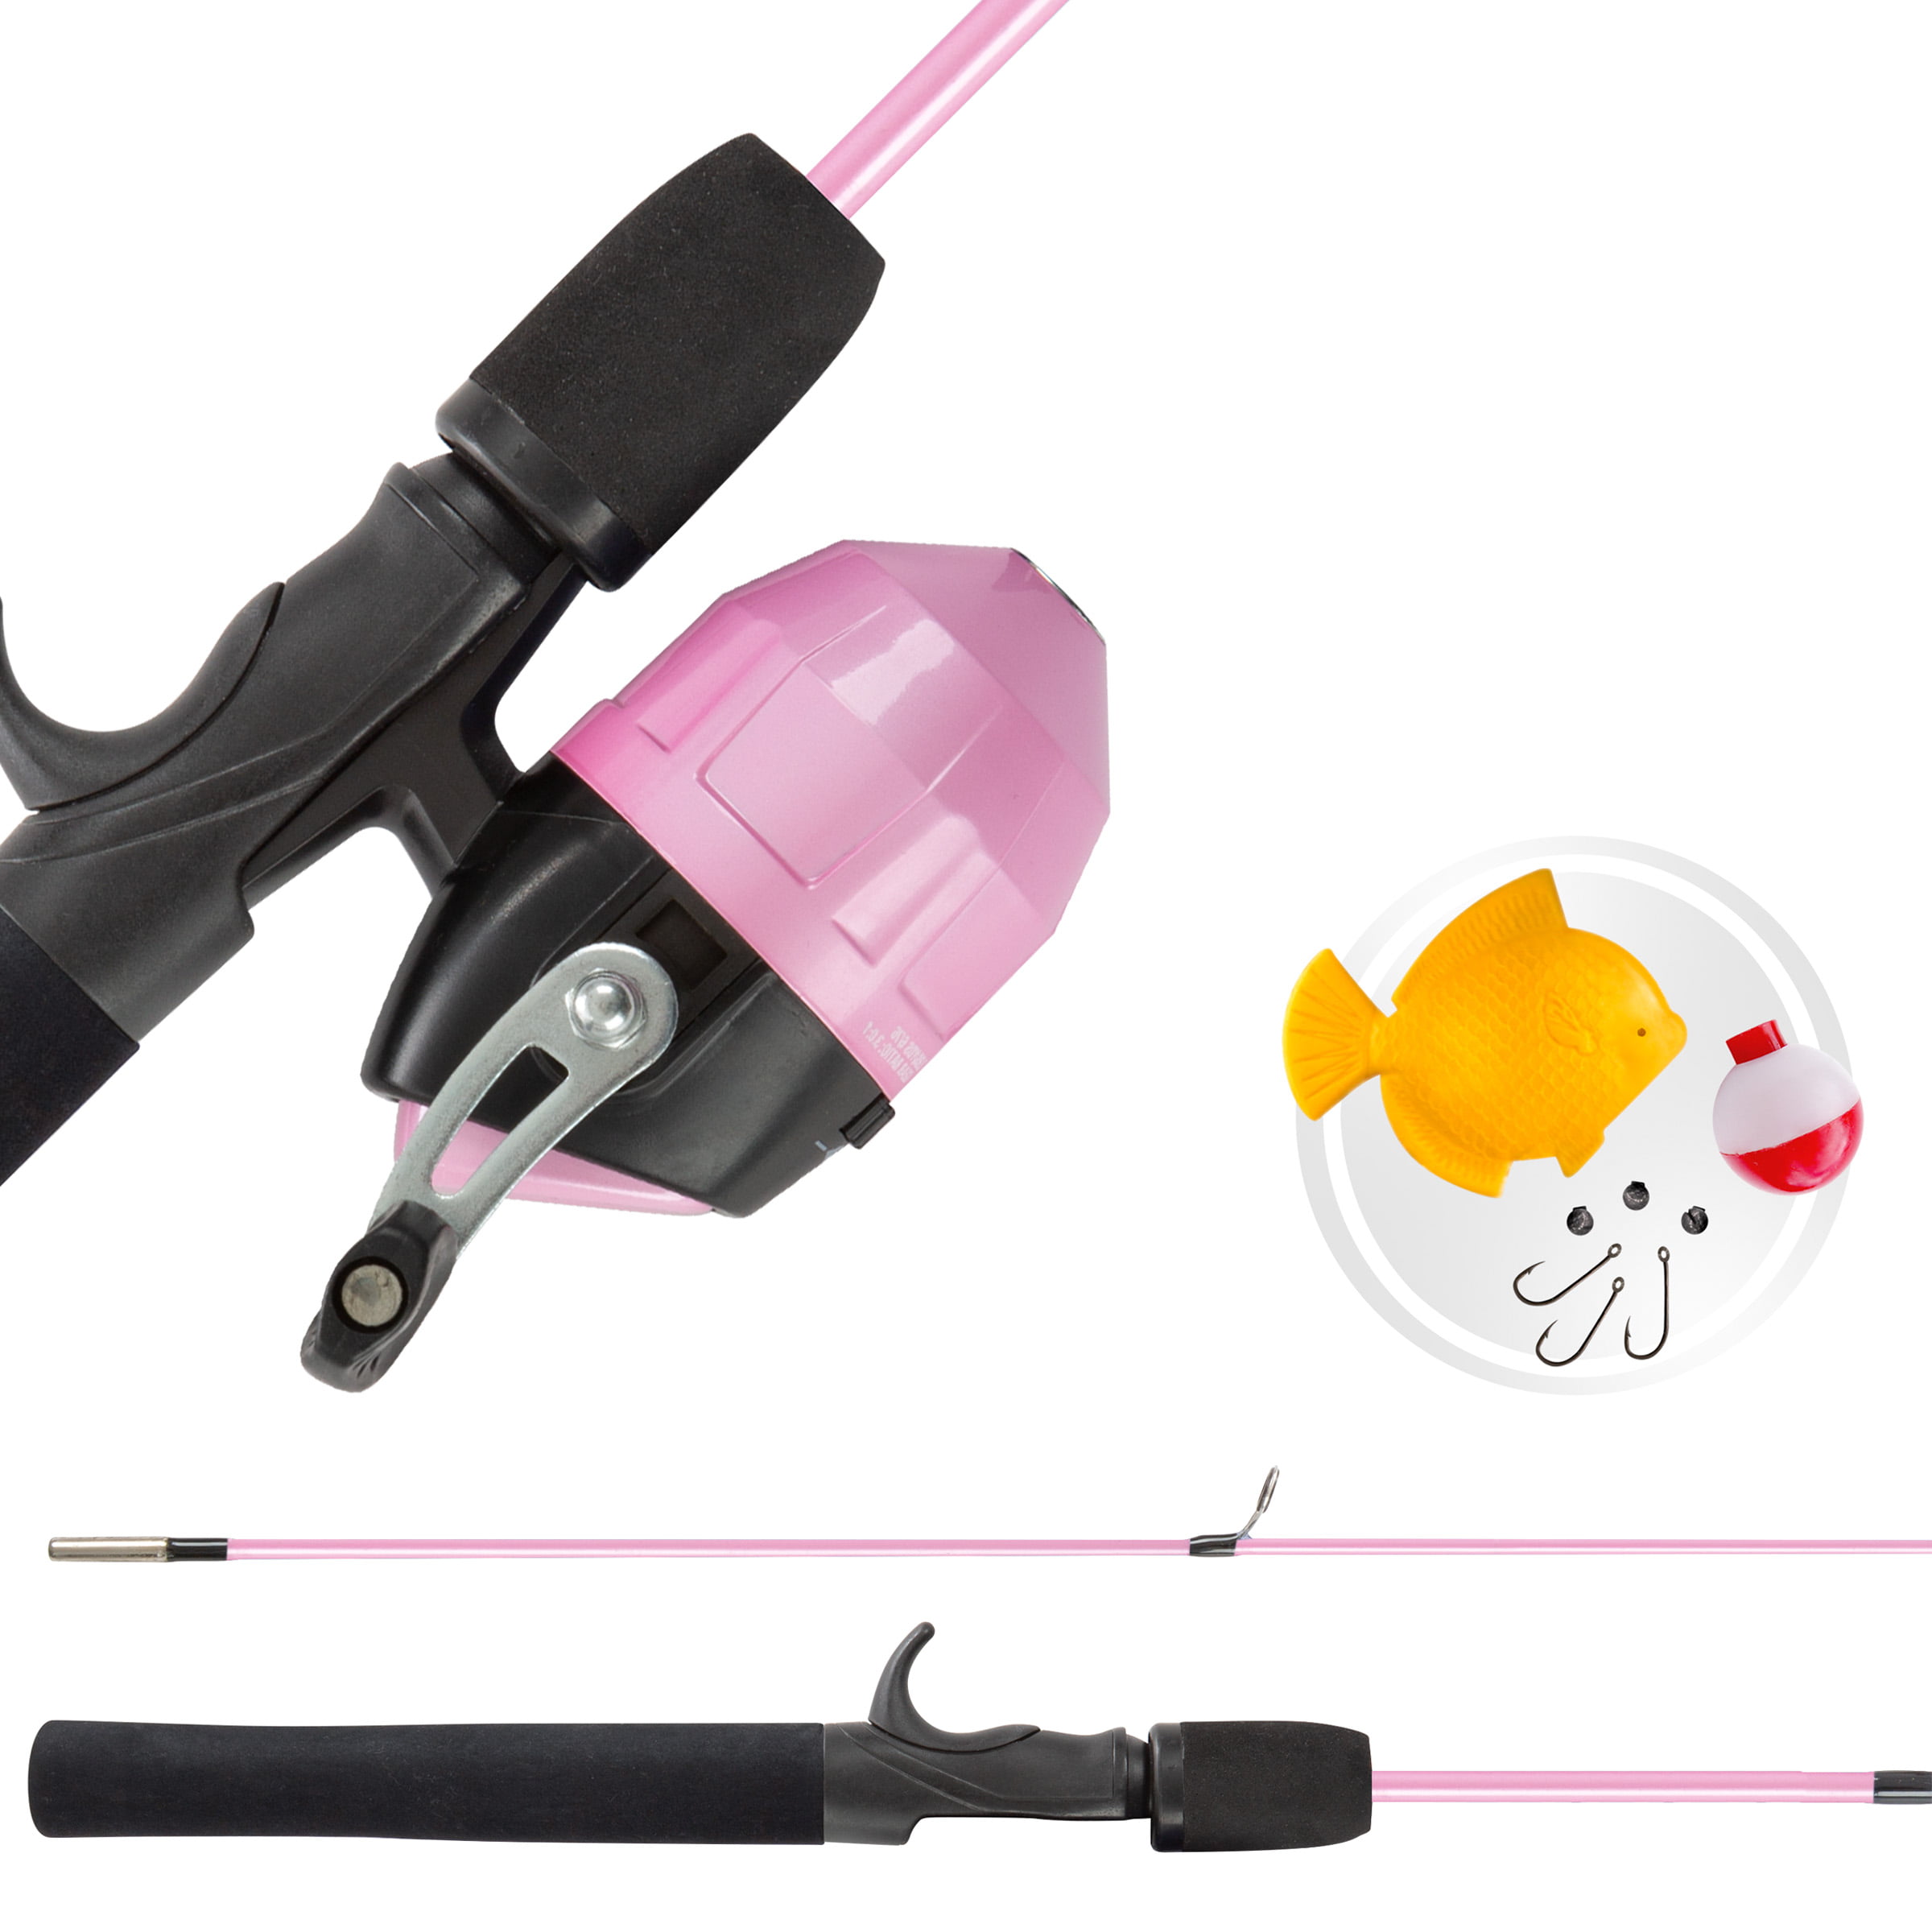  Urban Deco Kids Fishing Starter Kit - Rod and Reel Combos,  Portable Telescopic Fishing Rod with Tackle Box for Boys,Girls,Youth,Beginner  - Pink : Sports & Outdoors